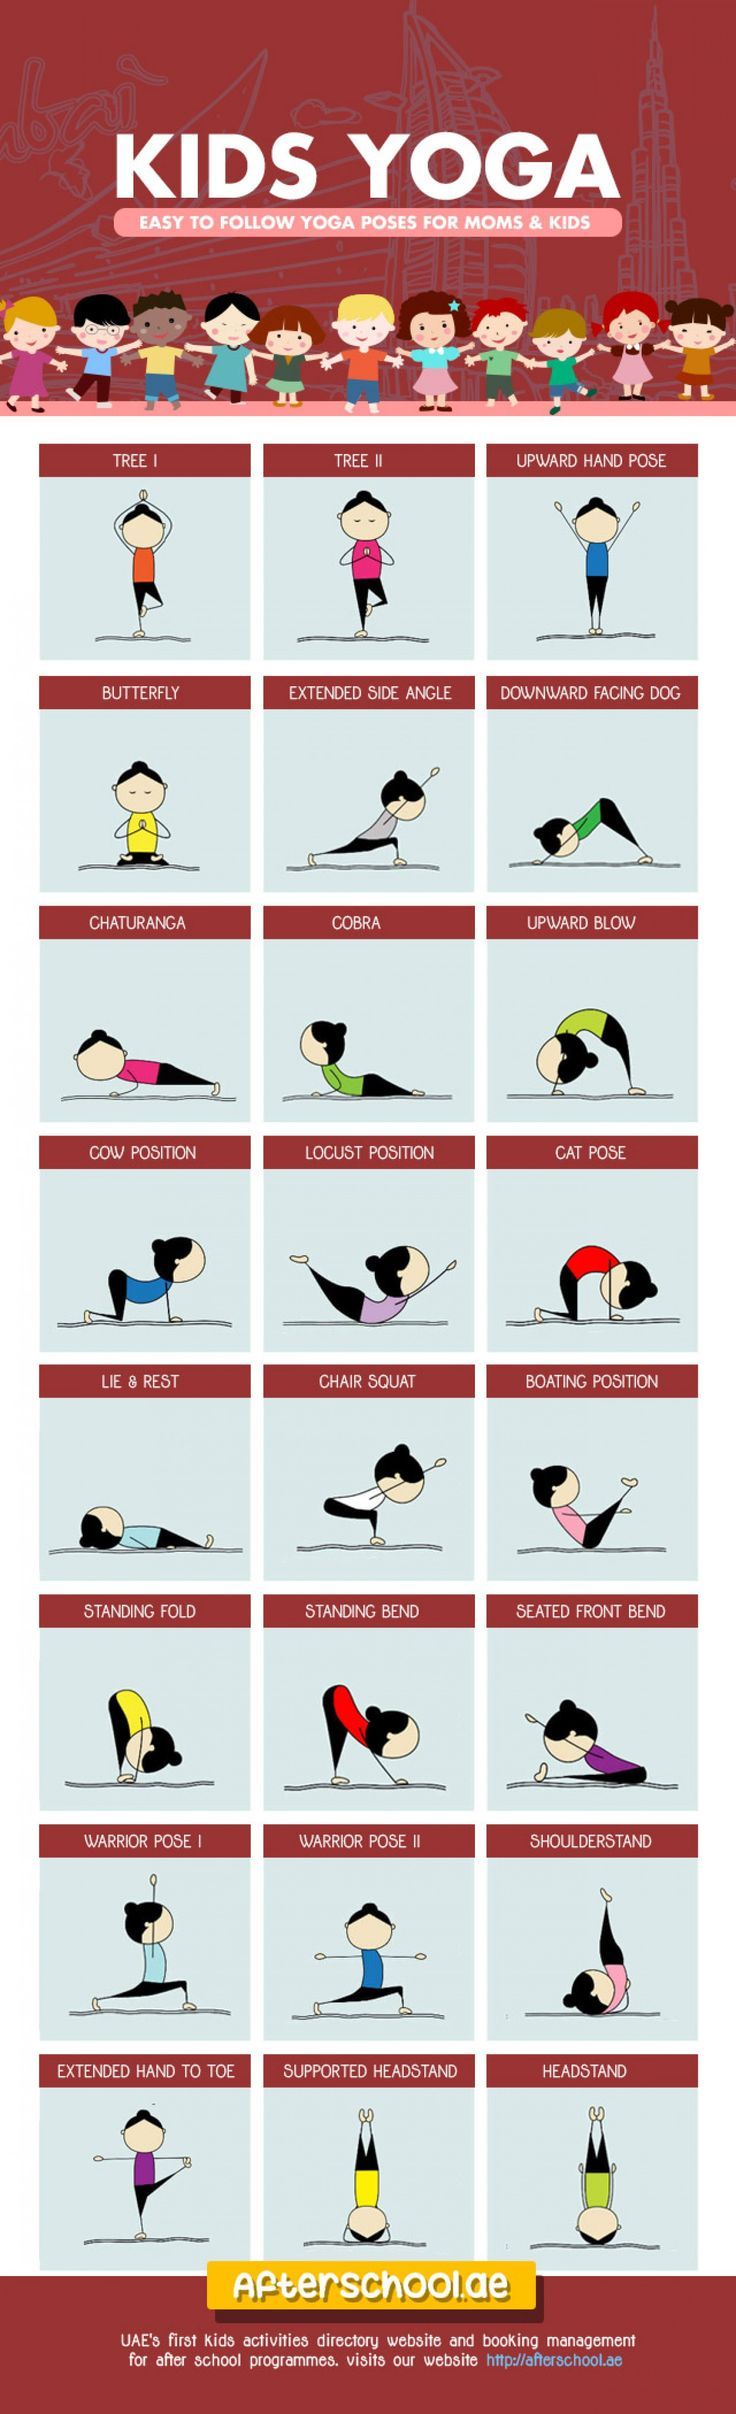 Yoga Positions Mom and Kids Could Try Together (Infographic) Infographic